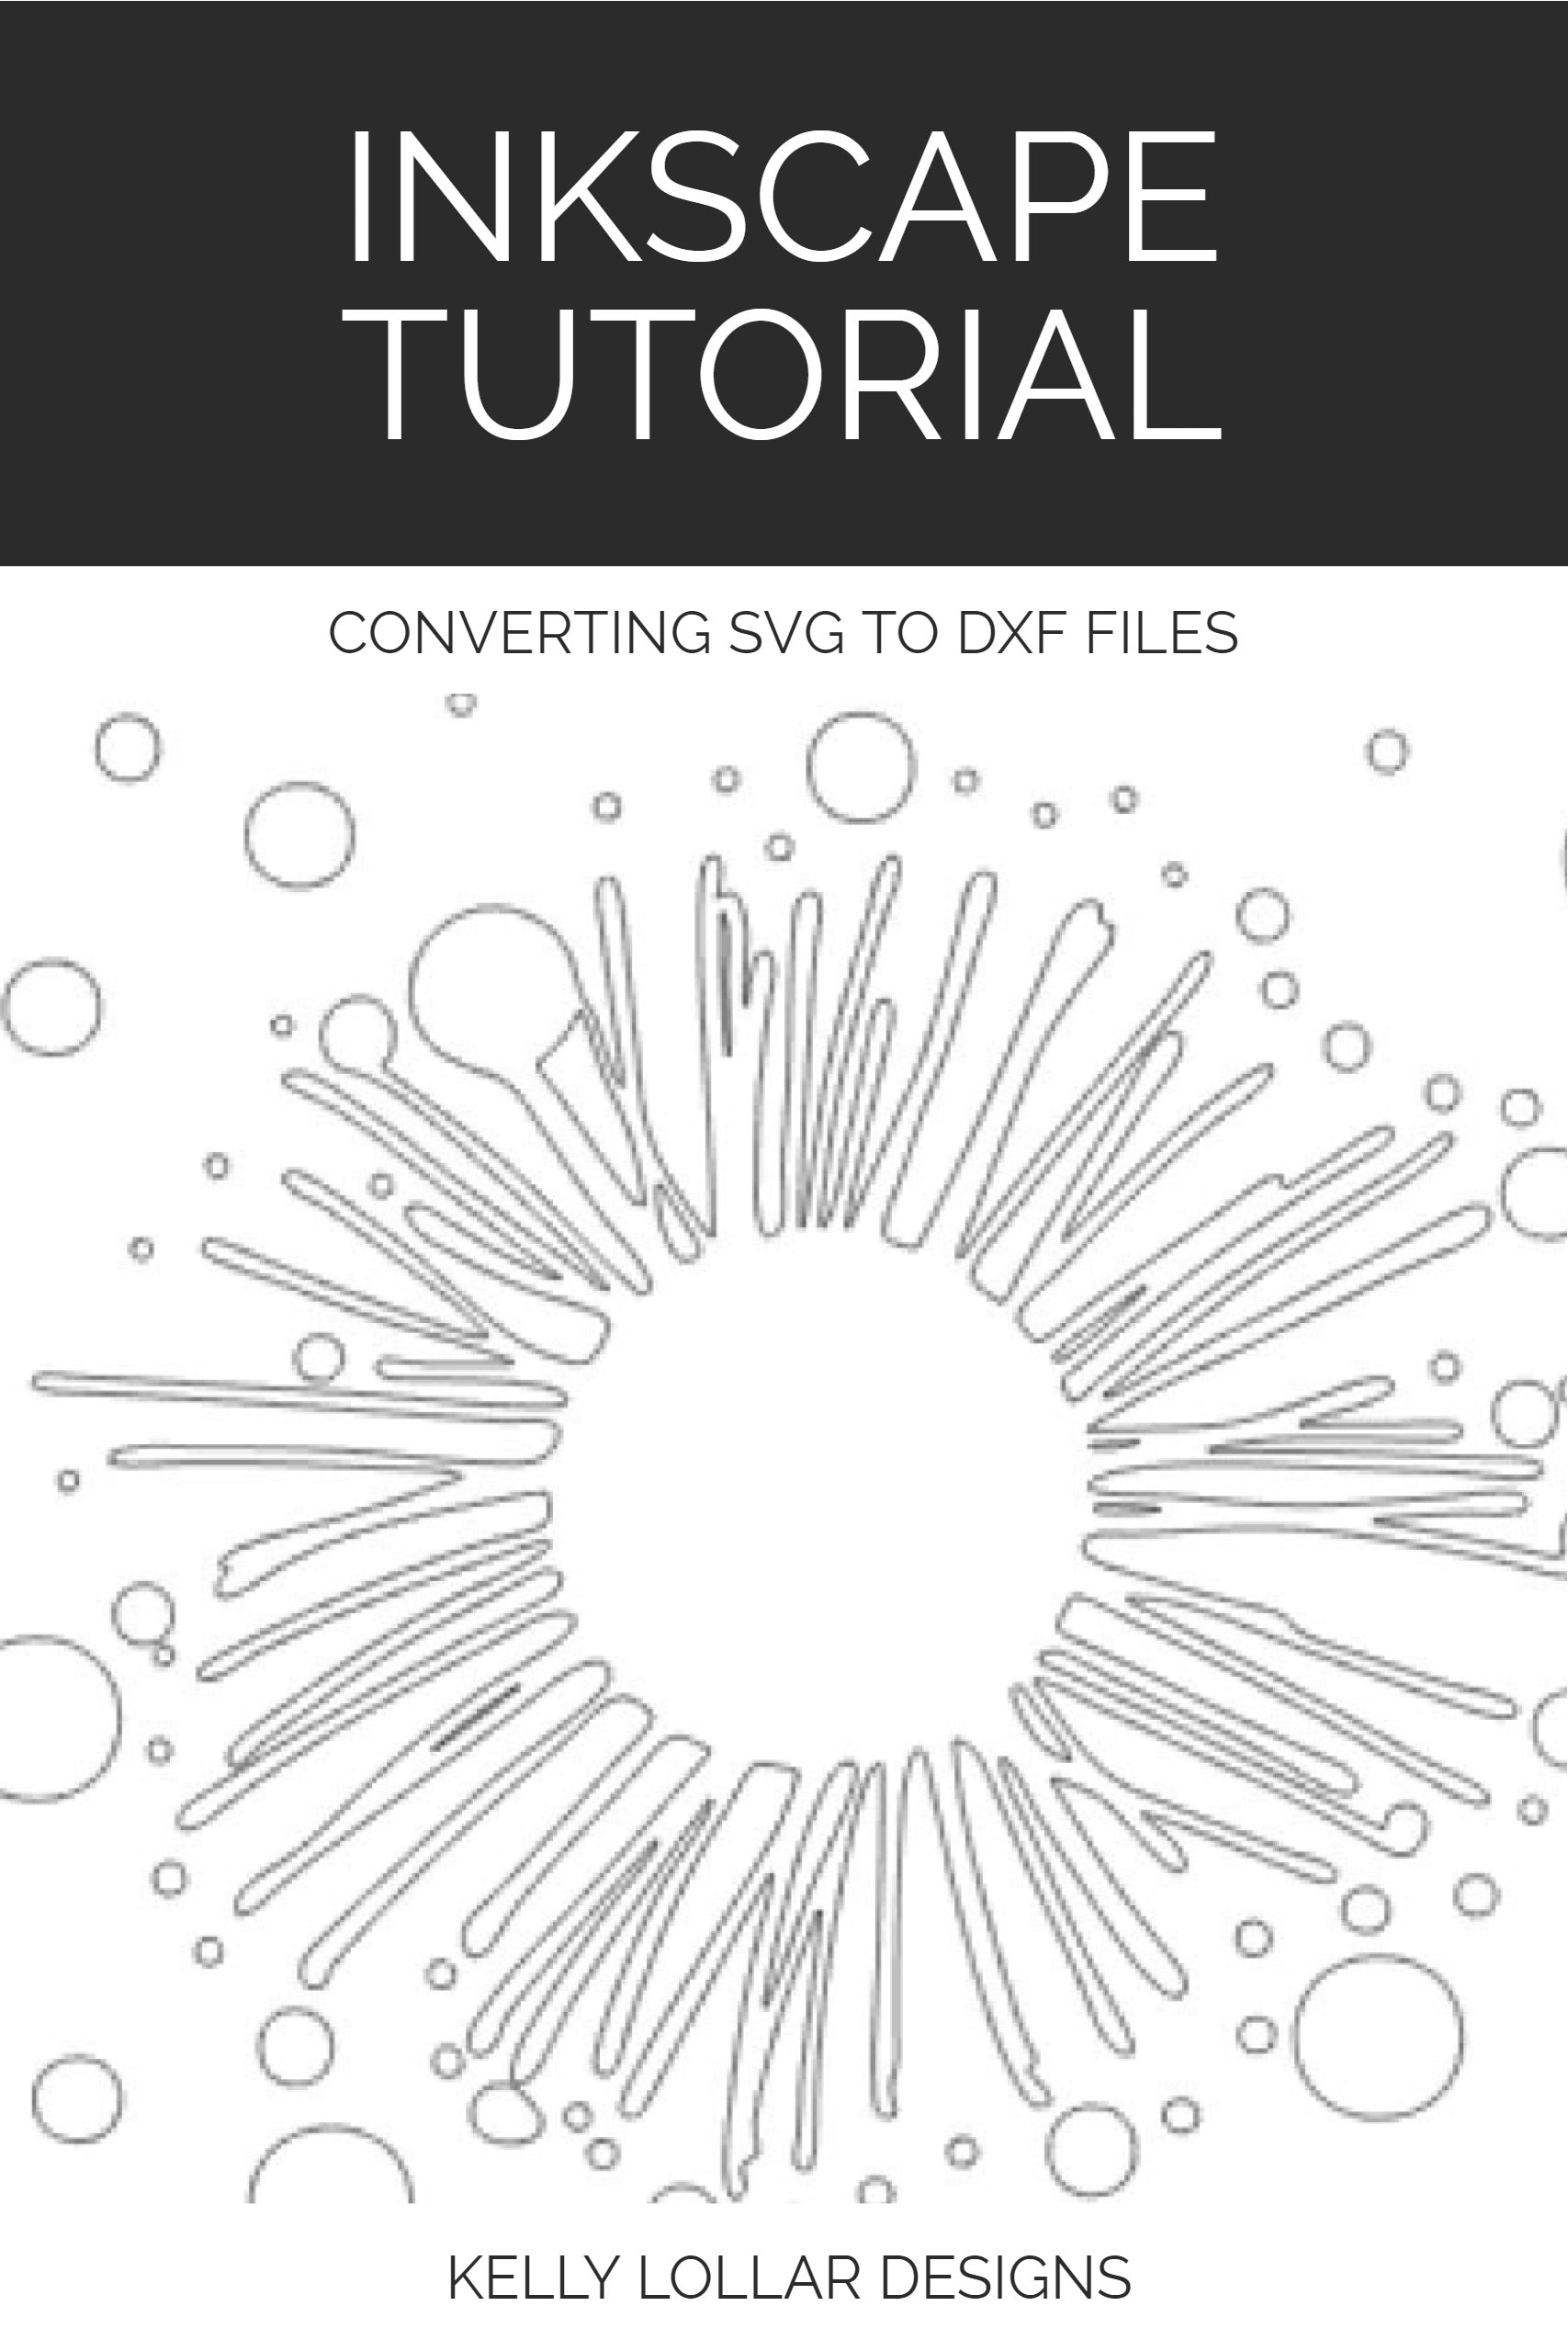 Inkscape Tutorial - Converting SVG Files to DXF Files | Kelly Lollar Designs